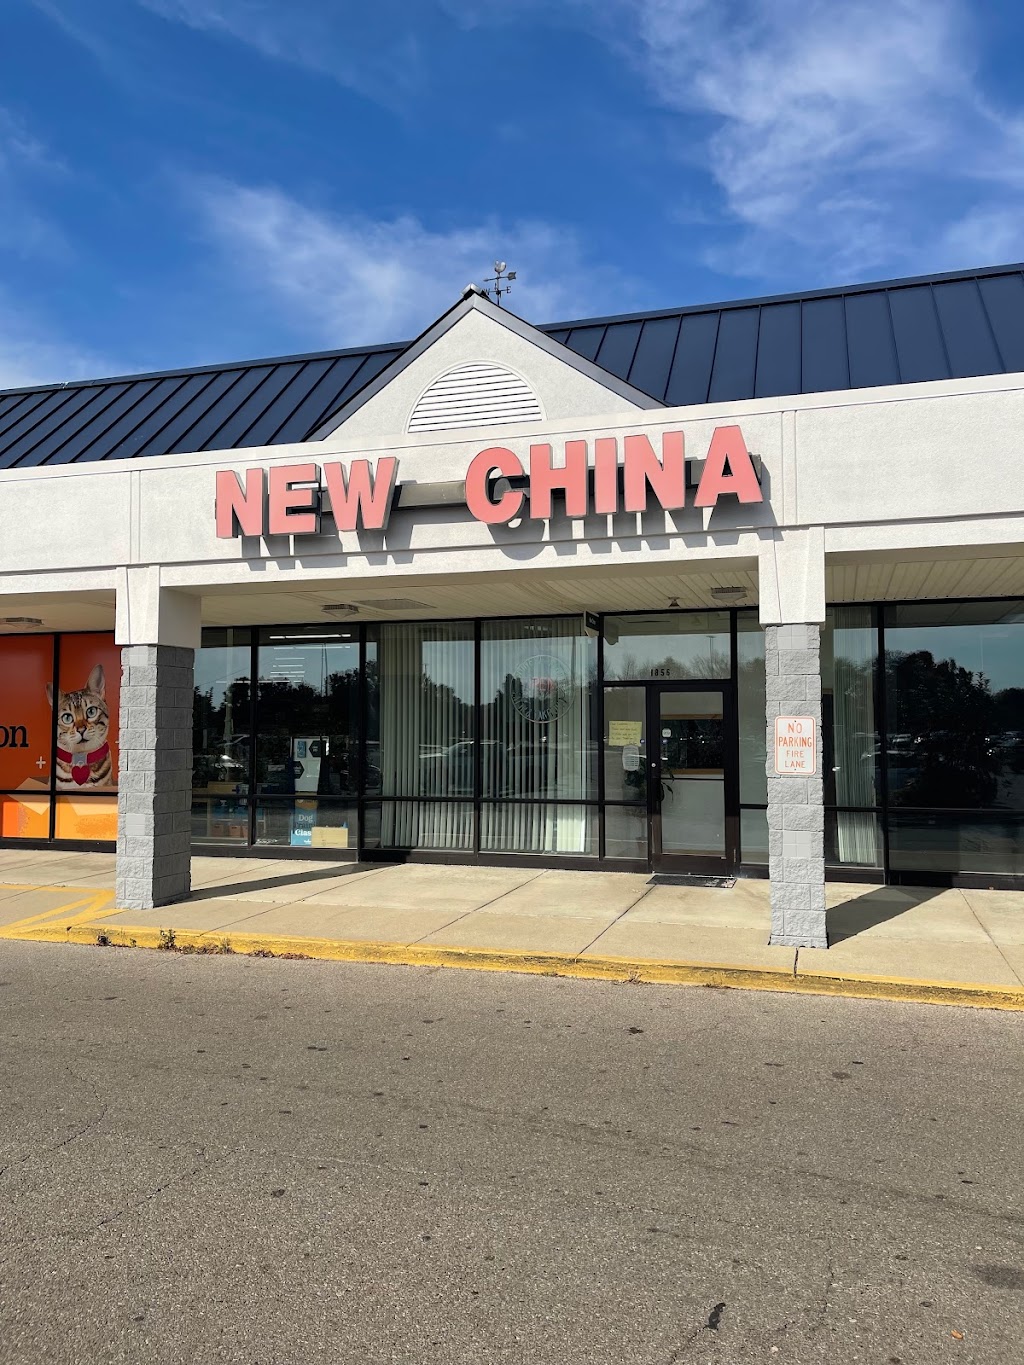 New China | 2668 1856, W Park Square, Xenia, OH 45385, USA | Phone: (937) 372-8885